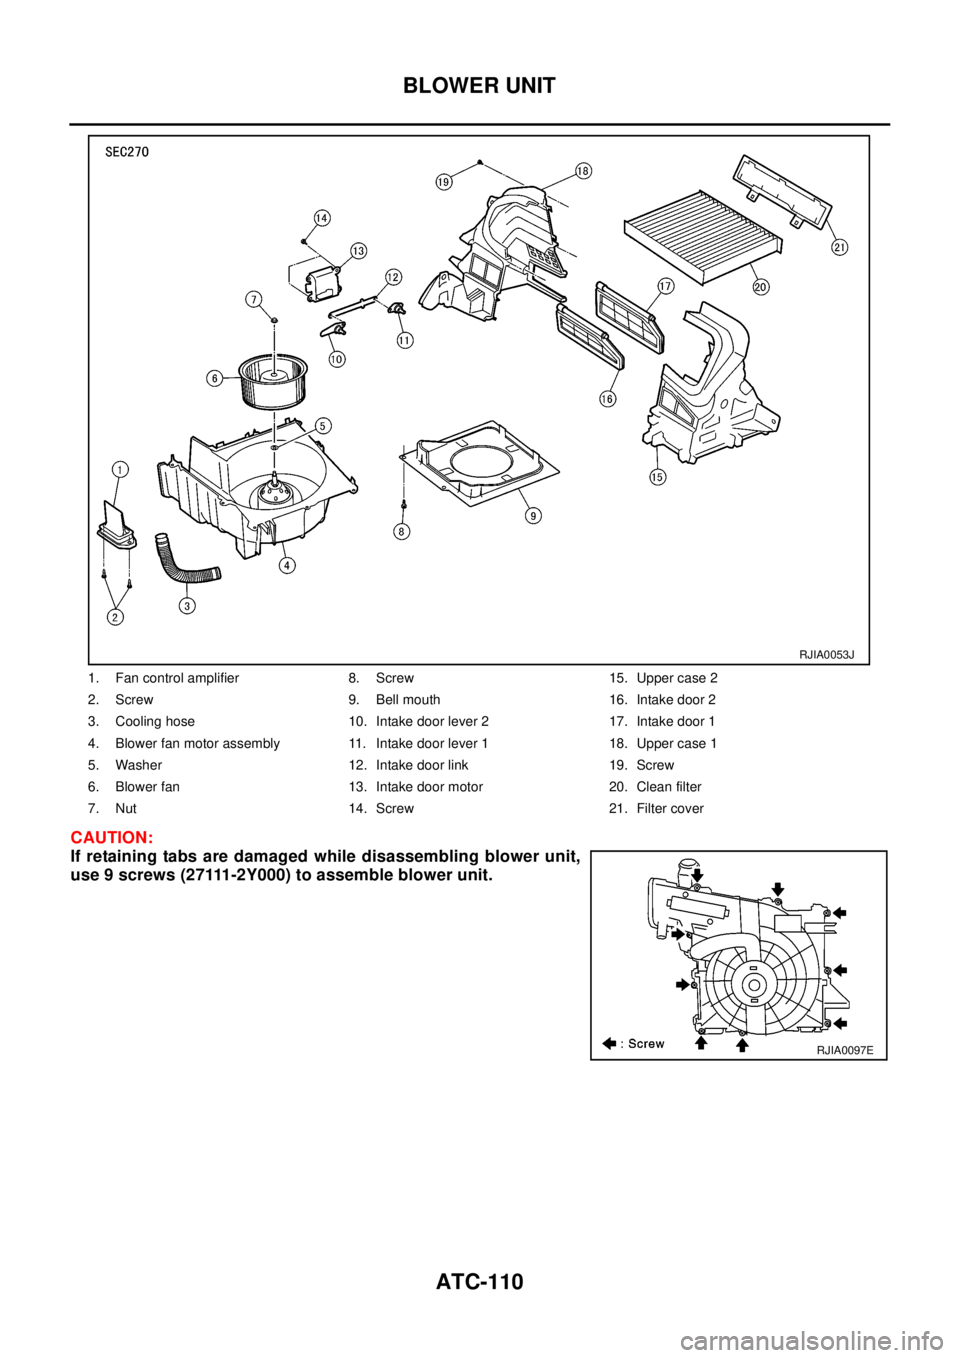 NISSAN X-TRAIL 2003  Electronic Repair Manual ATC-110
BLOWER UNIT
CAUTION:
If retaining tabs are damaged while disassembling blower unit,
use 9 screws (27111-2Y000) to assemble blower unit.
1. Fan control amplifier 8. Screw 15. Upper case 2
2. Sc